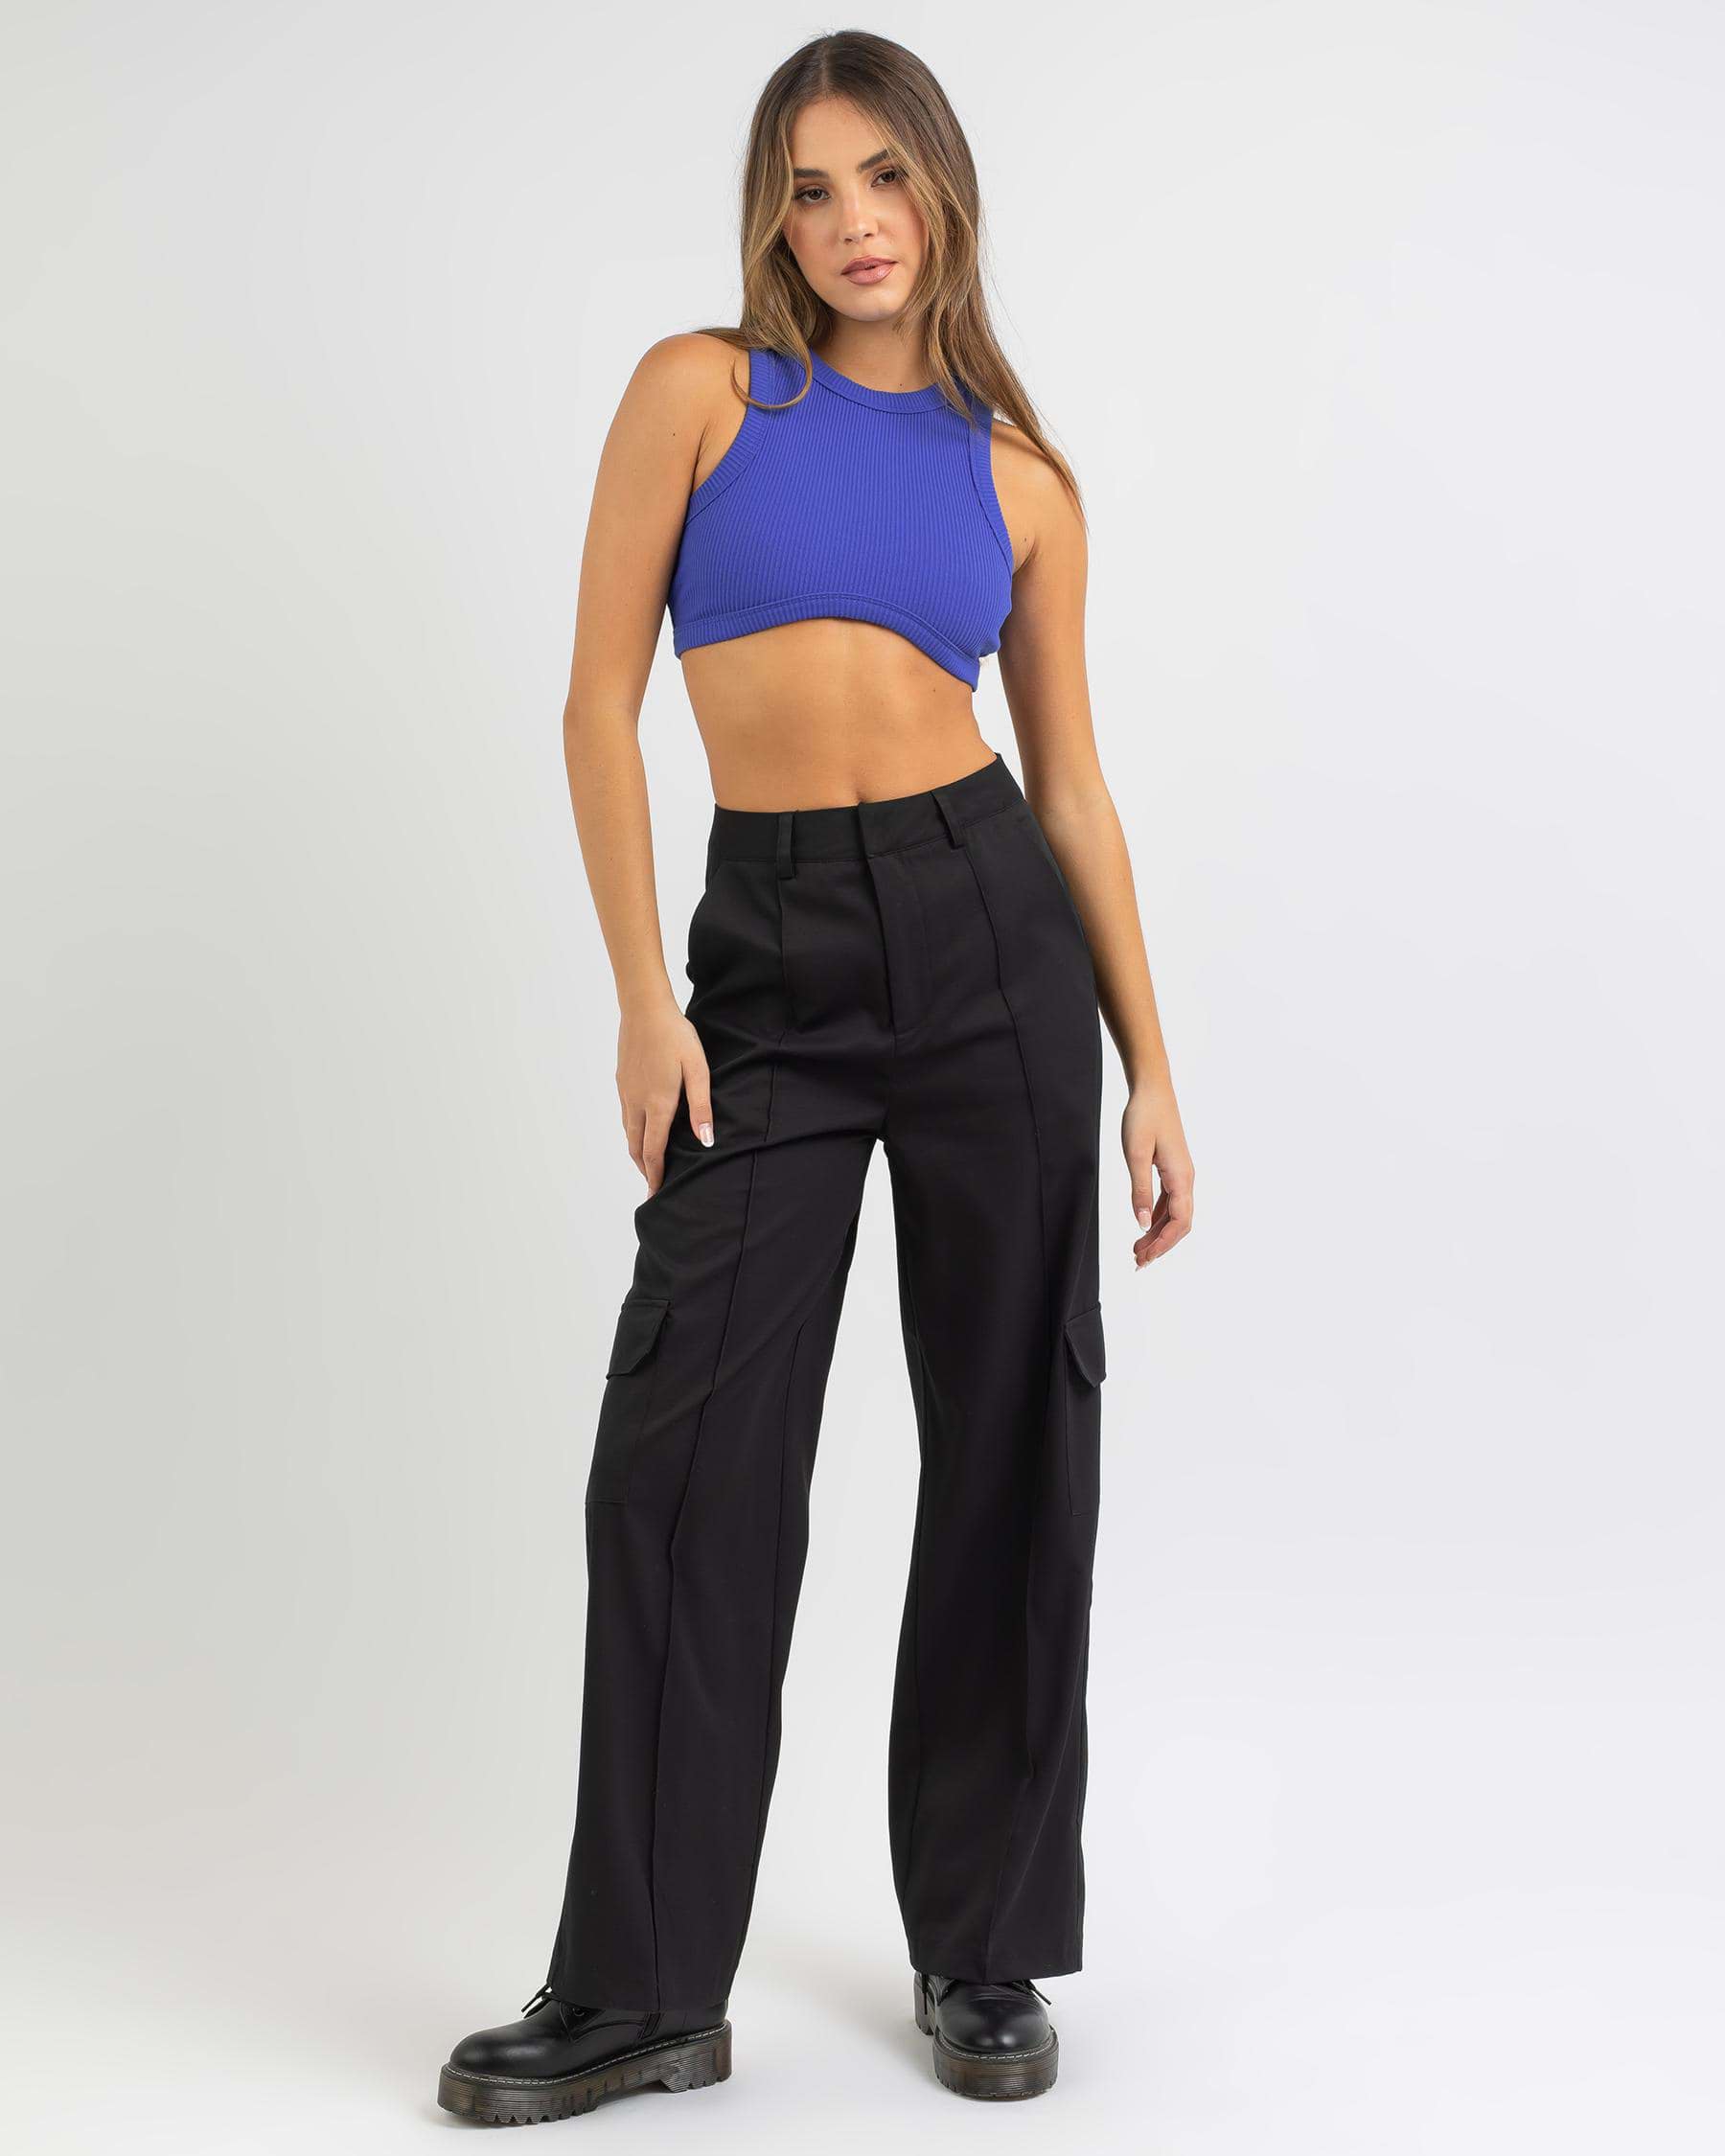 Ava And Ever Kendra Ultra Crop Top In Blue - Fast Shipping & Easy ...